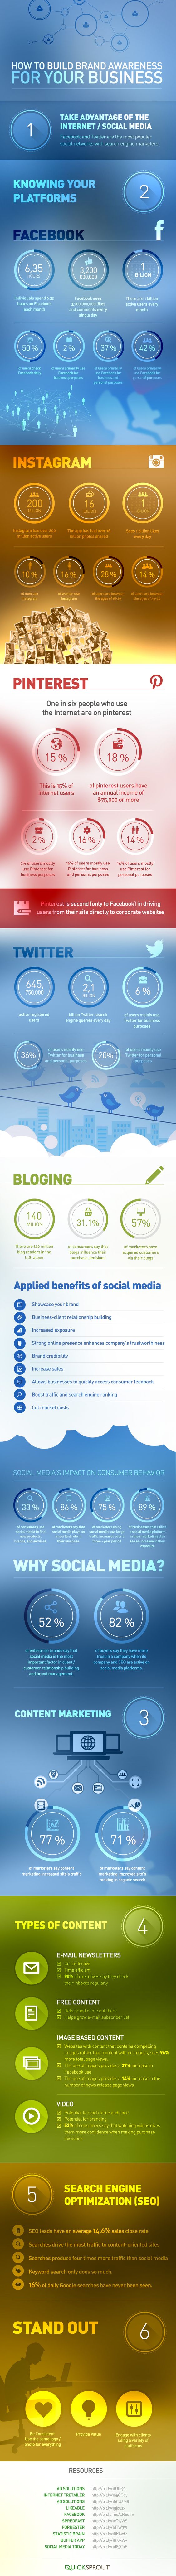 Infographic of the Week: How To Build Brand Awareness In The Digital Age